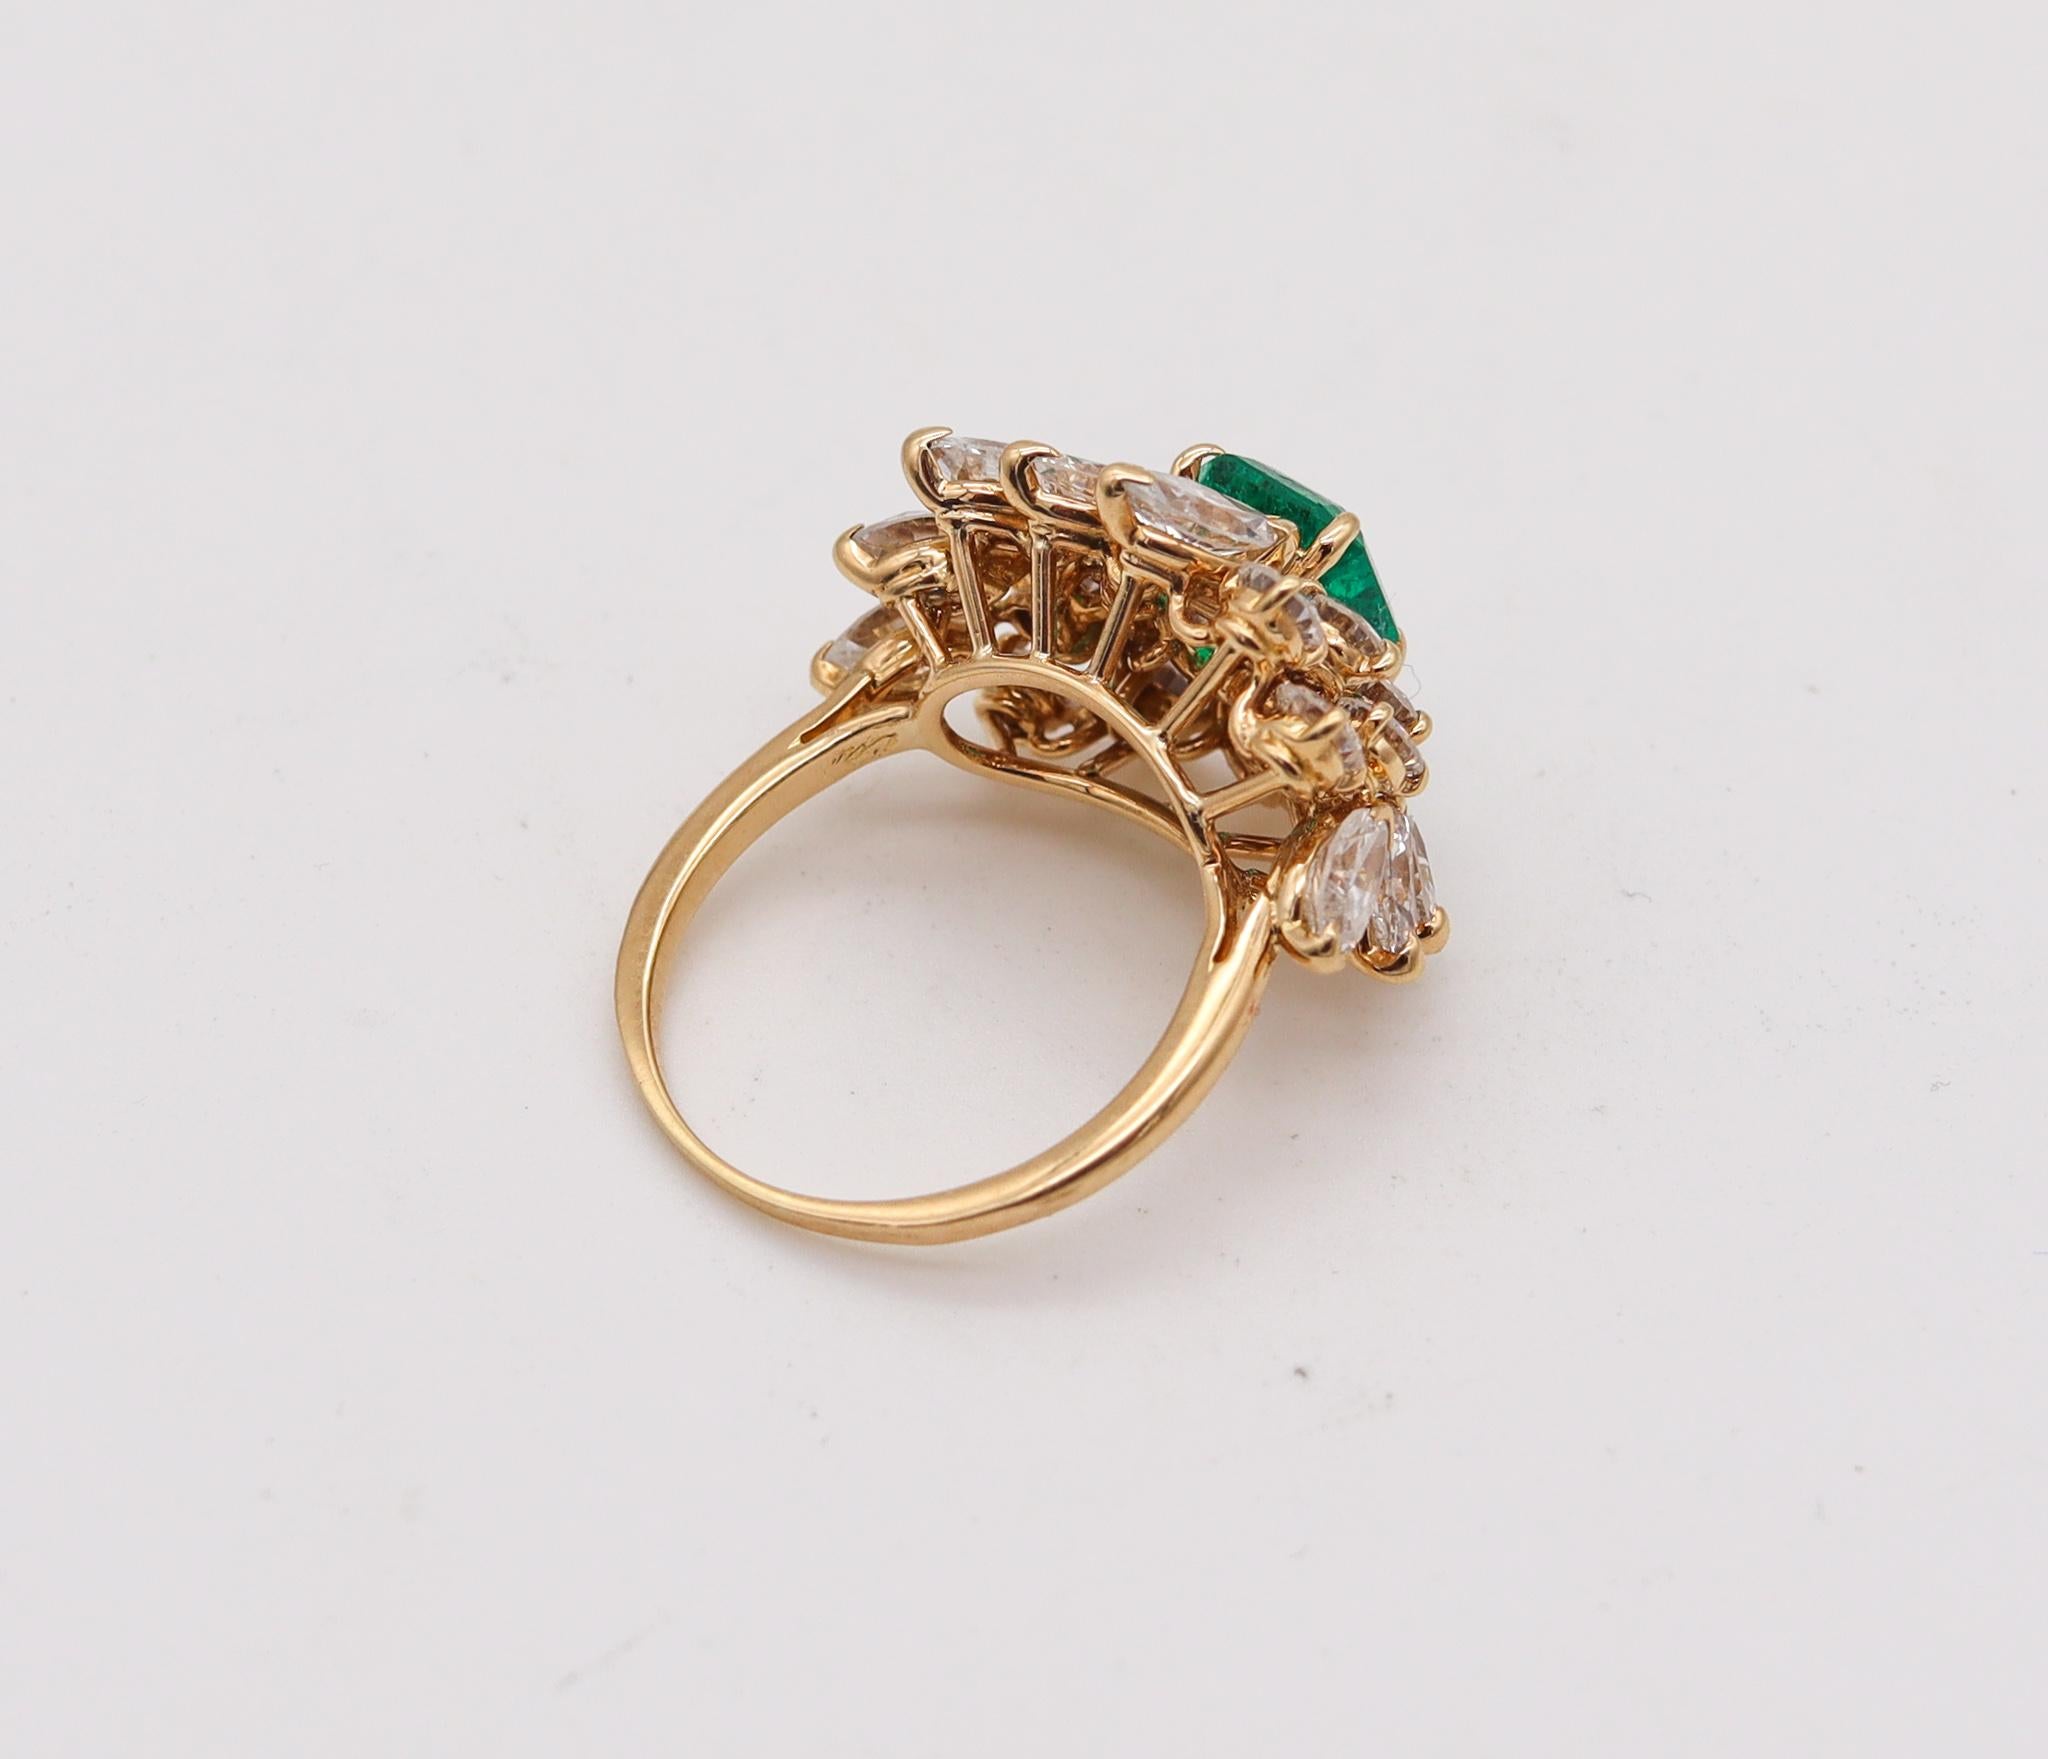 Cluster Cocktail Ring in 18kt Yellow Gold 5.61ctw Colombian Emerald & Diamonds In Excellent Condition For Sale In Miami, FL